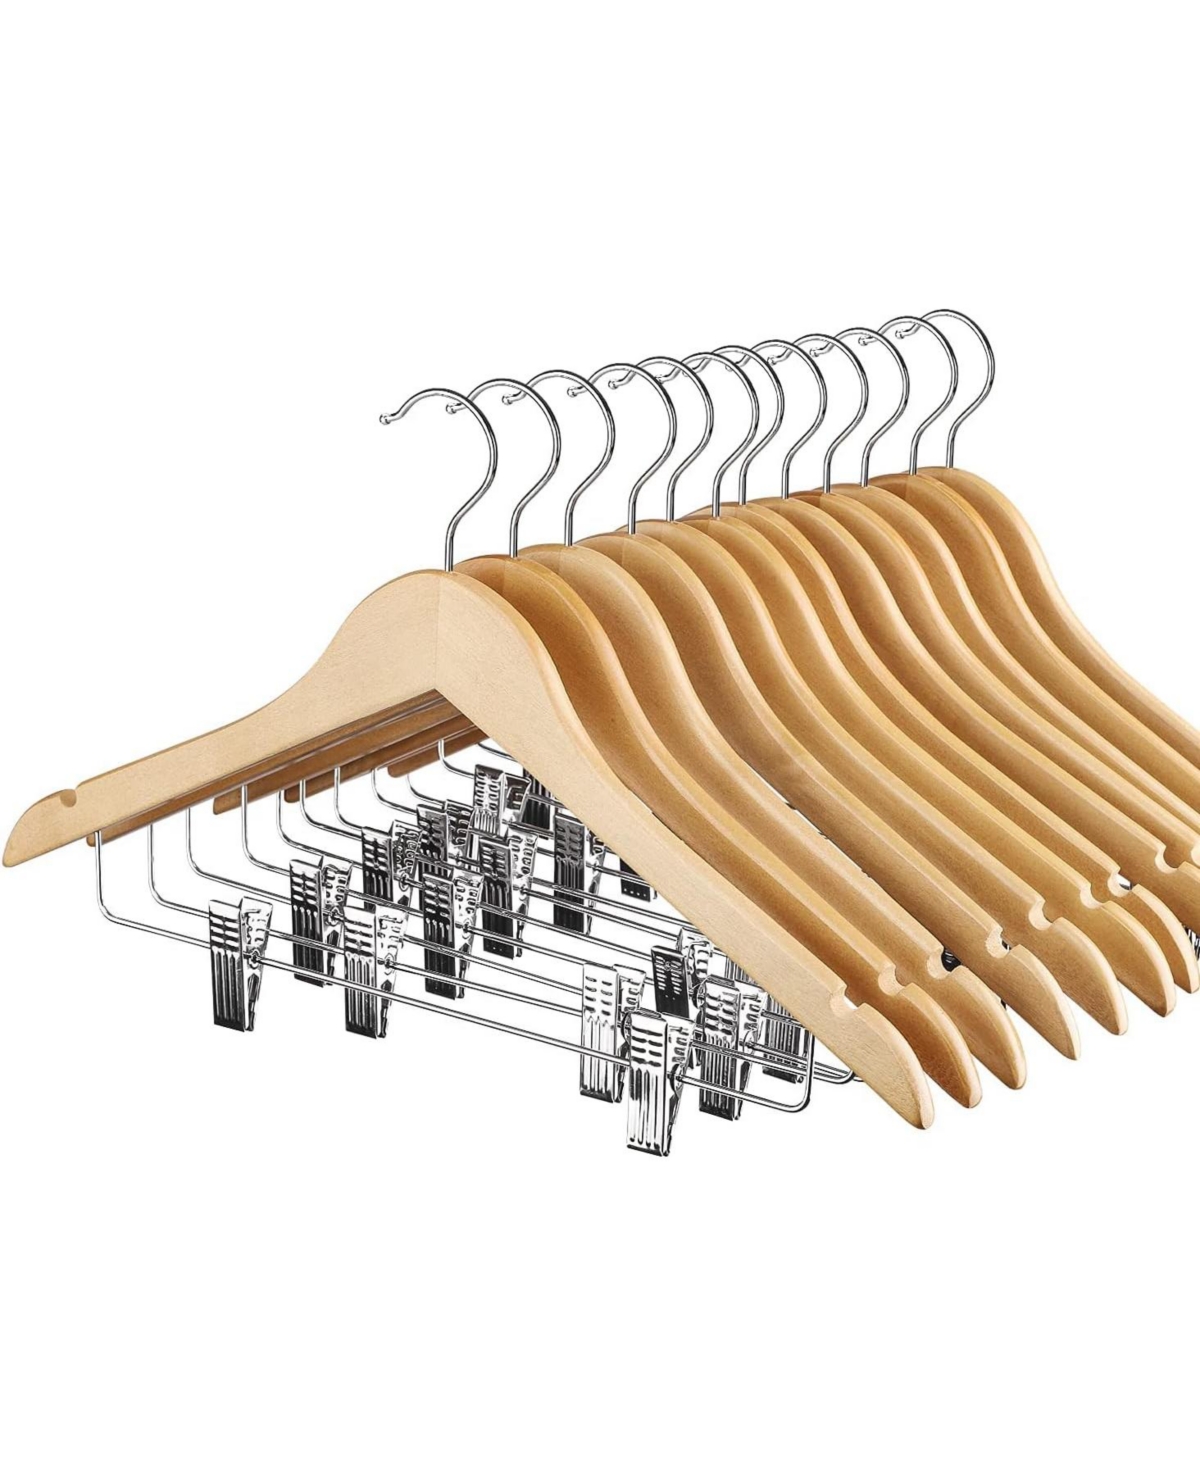 High-Grade Wooden Suit Hangers Skirt Hangers with Clips 12 Pack Natural - Natural